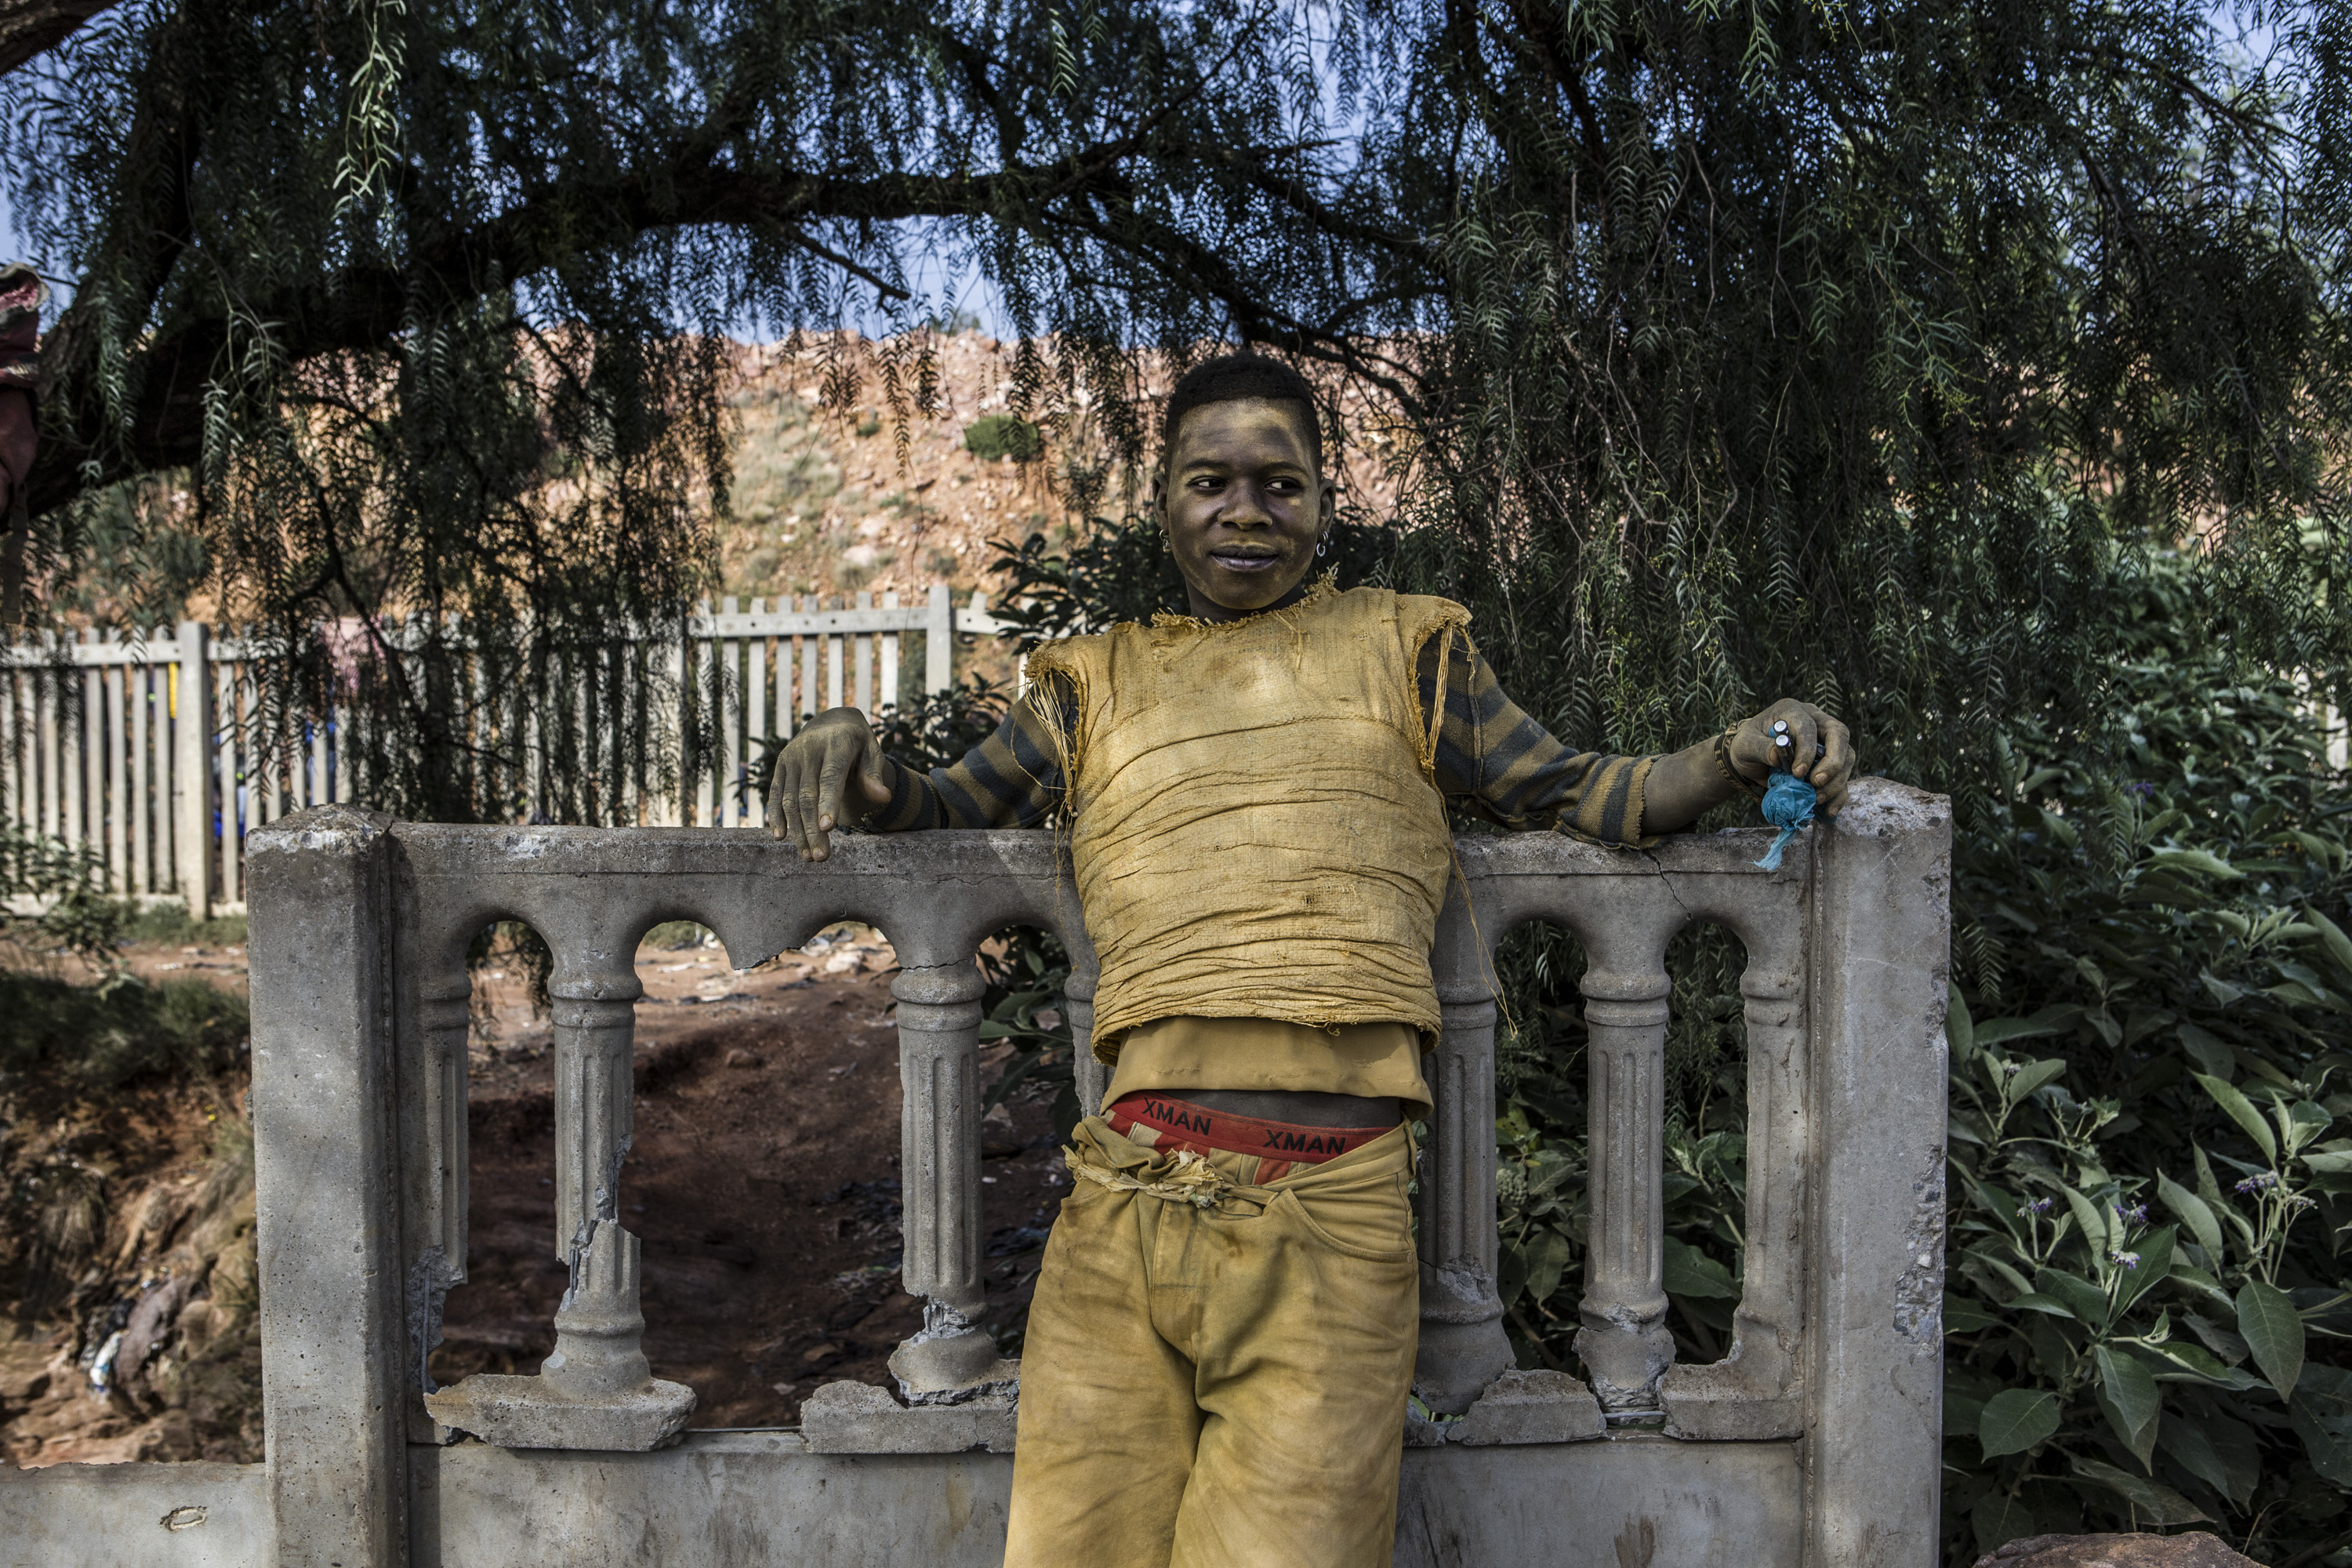 Nandos Simao digs for gold in abandoned mines, from 'Wake Up, This Is Joburg'. Image: Mark Lewis